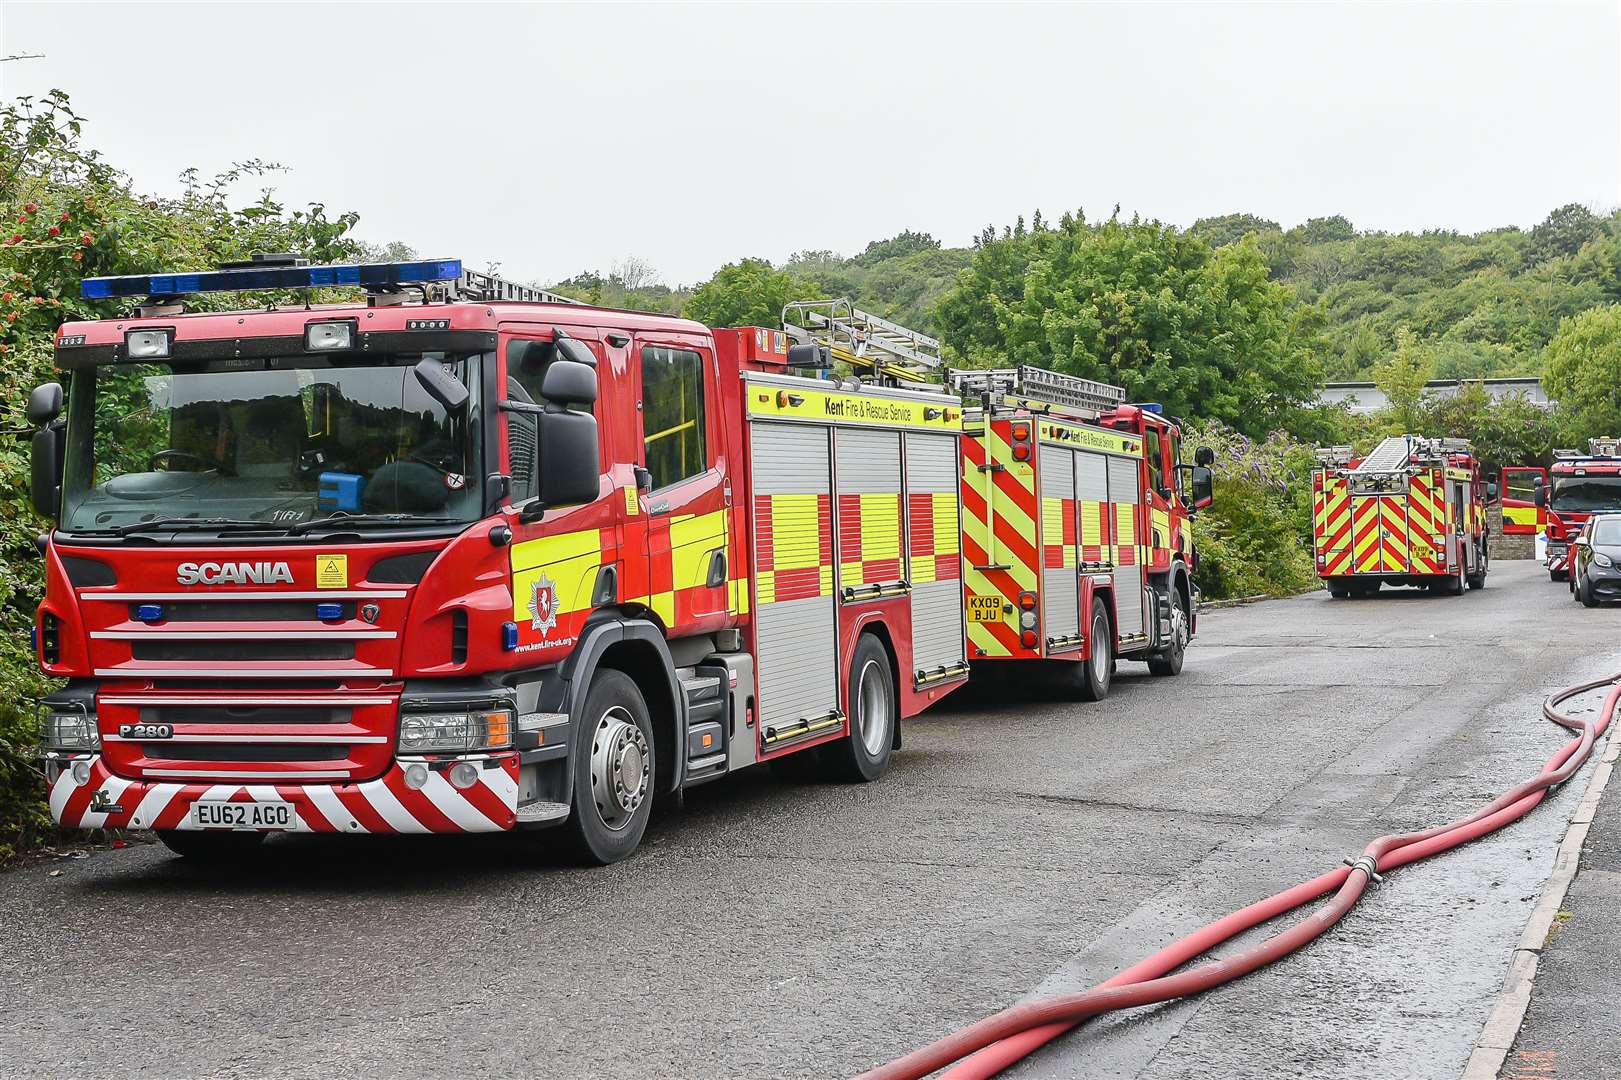 Four fire engines attended the scene Stock pic